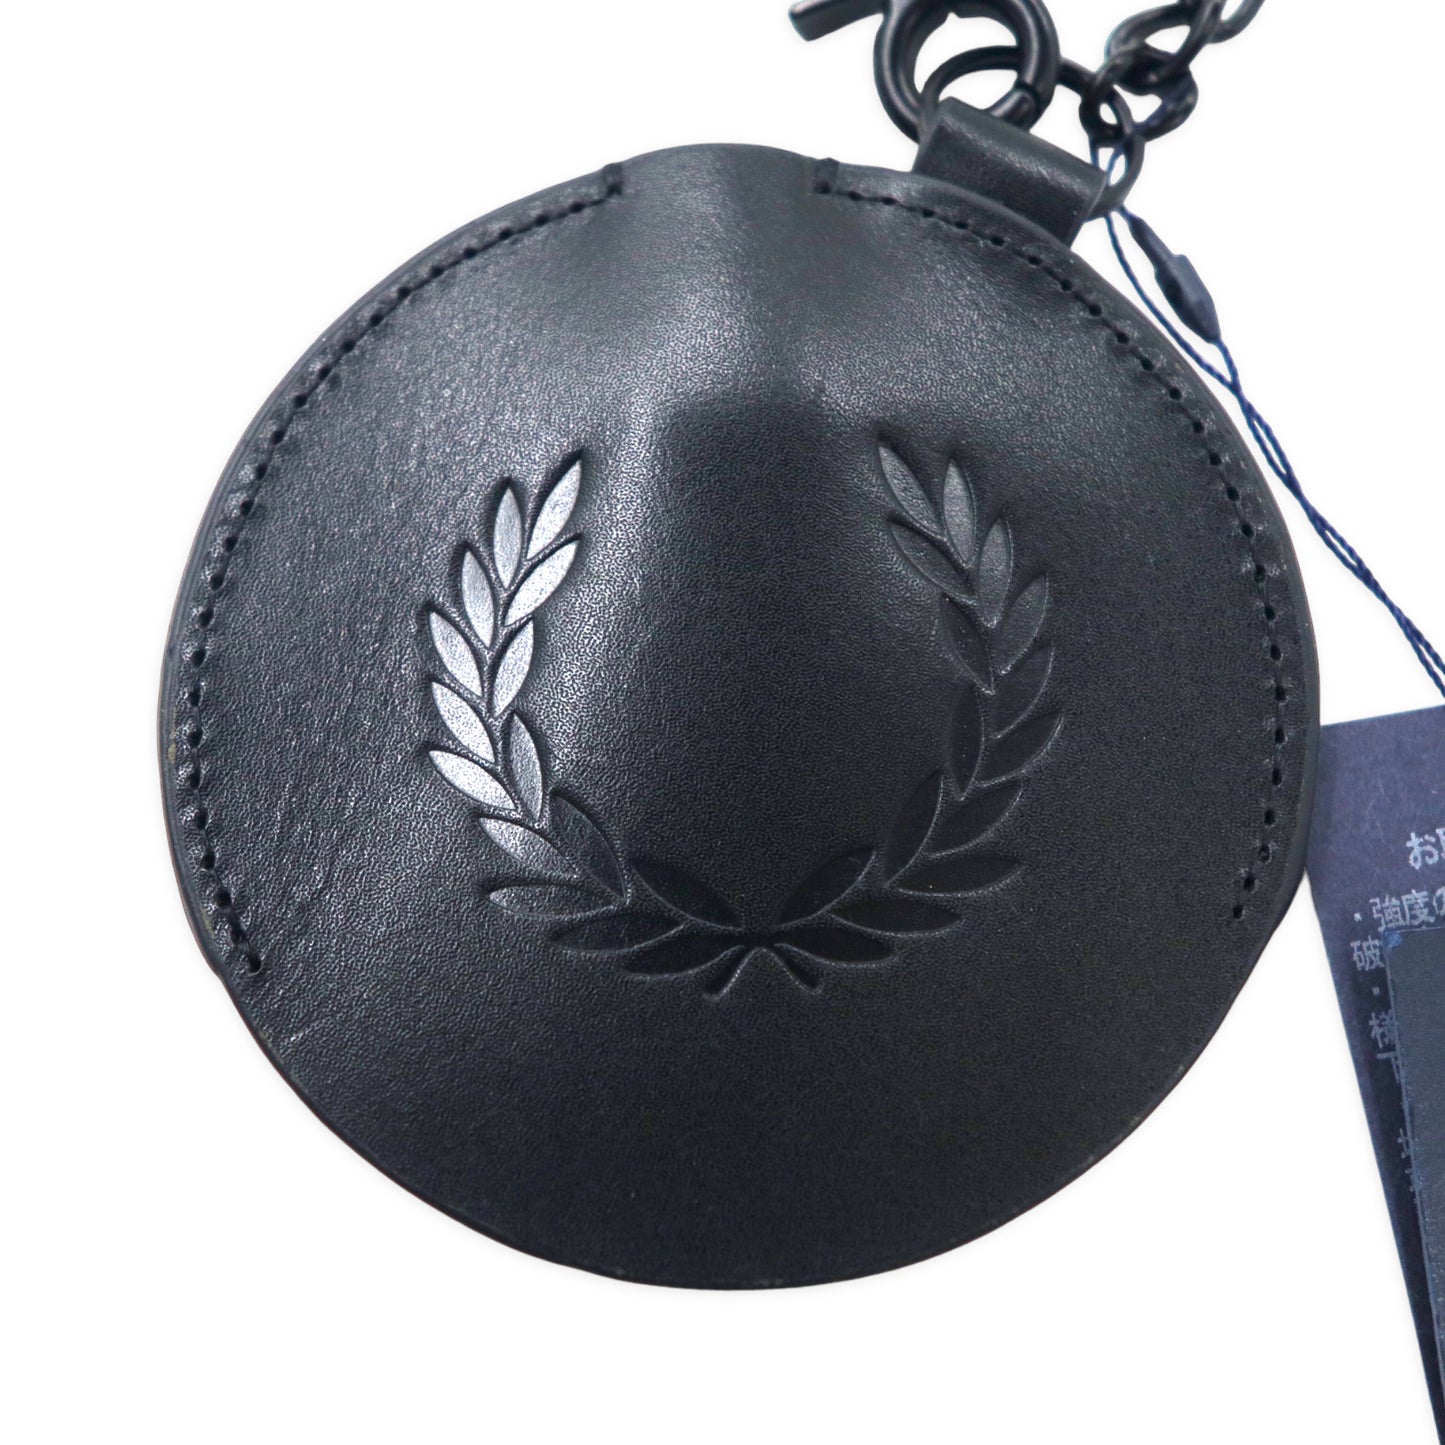 FRED PERRY レザー キーチェーン ウェレットチェーン ブラック LAUREL WREATH LEATHER KEY FOB L2306 未使用品